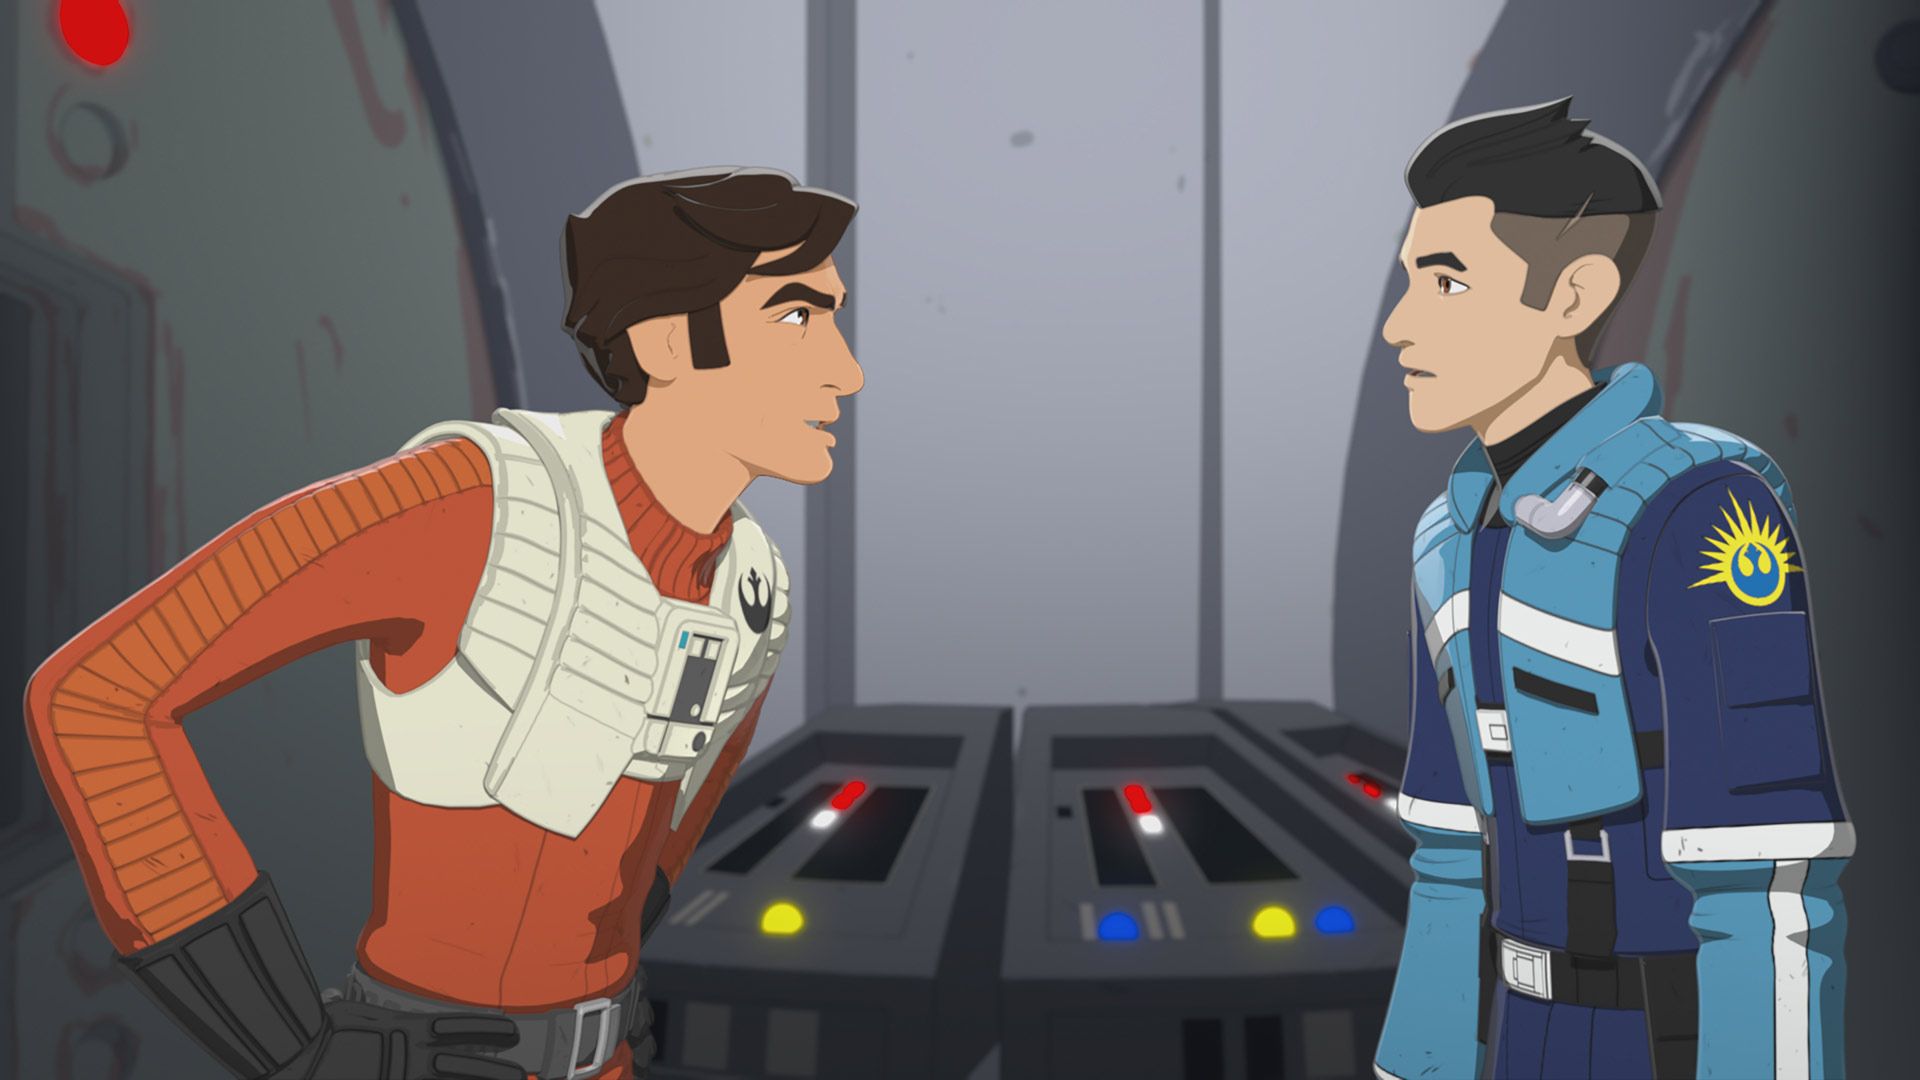 Star Wars Resistance Season One Premiere Review: “The Recruit”